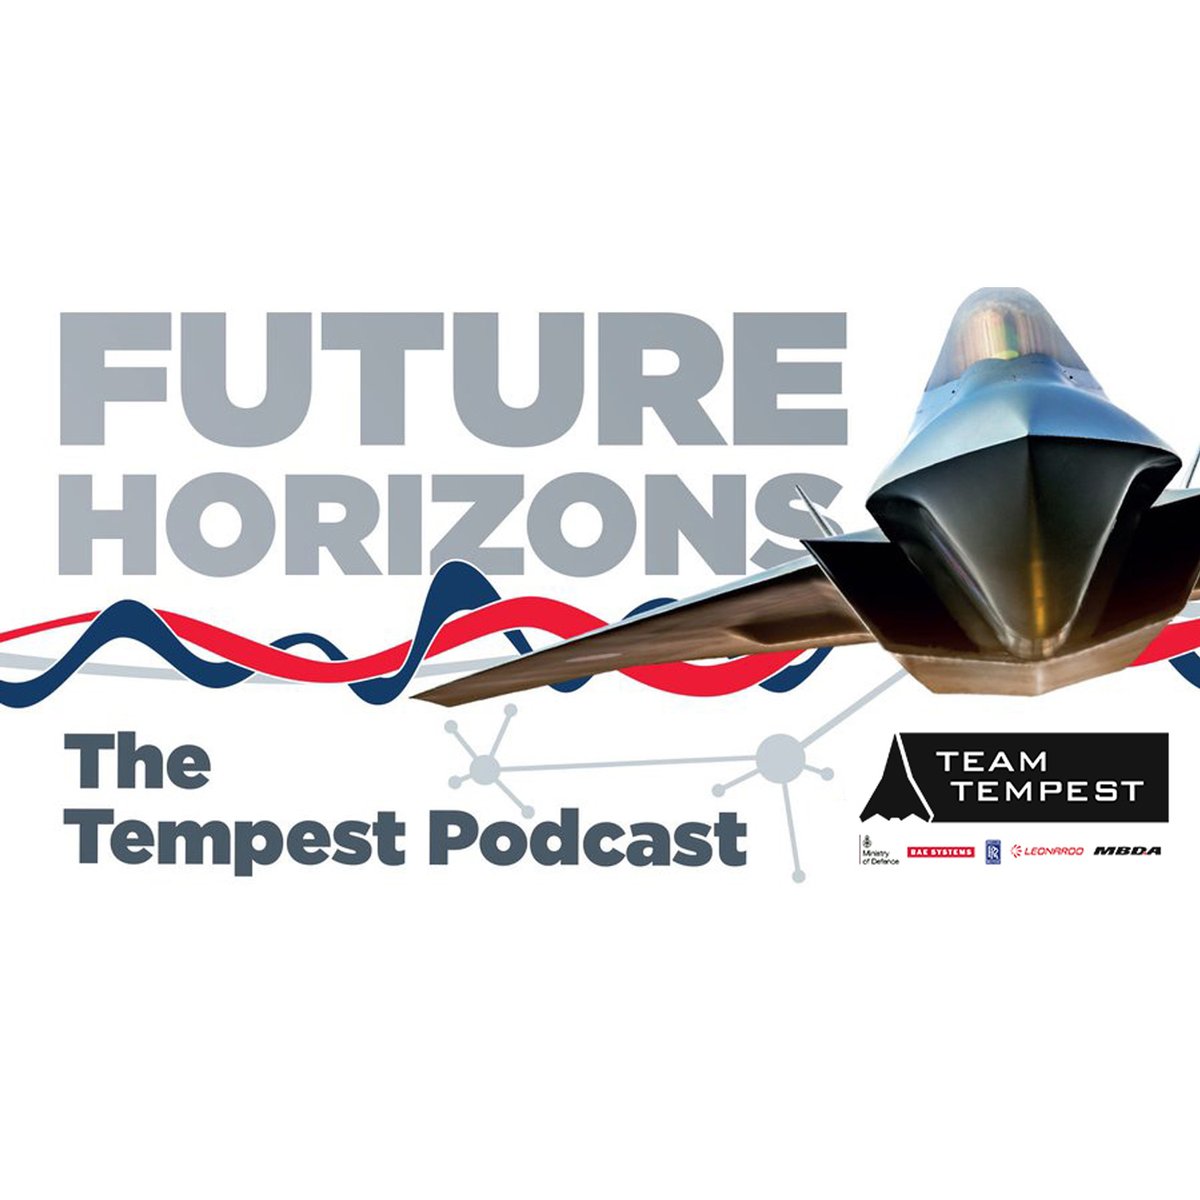 Listen to the latest #TeamTempest podcast to find out how we're utilising the full power of digitisation. Future Horizons: ow.ly/tQoU50R26Rp #RollsRoyce #Technology #TeamTempest #Digitisation